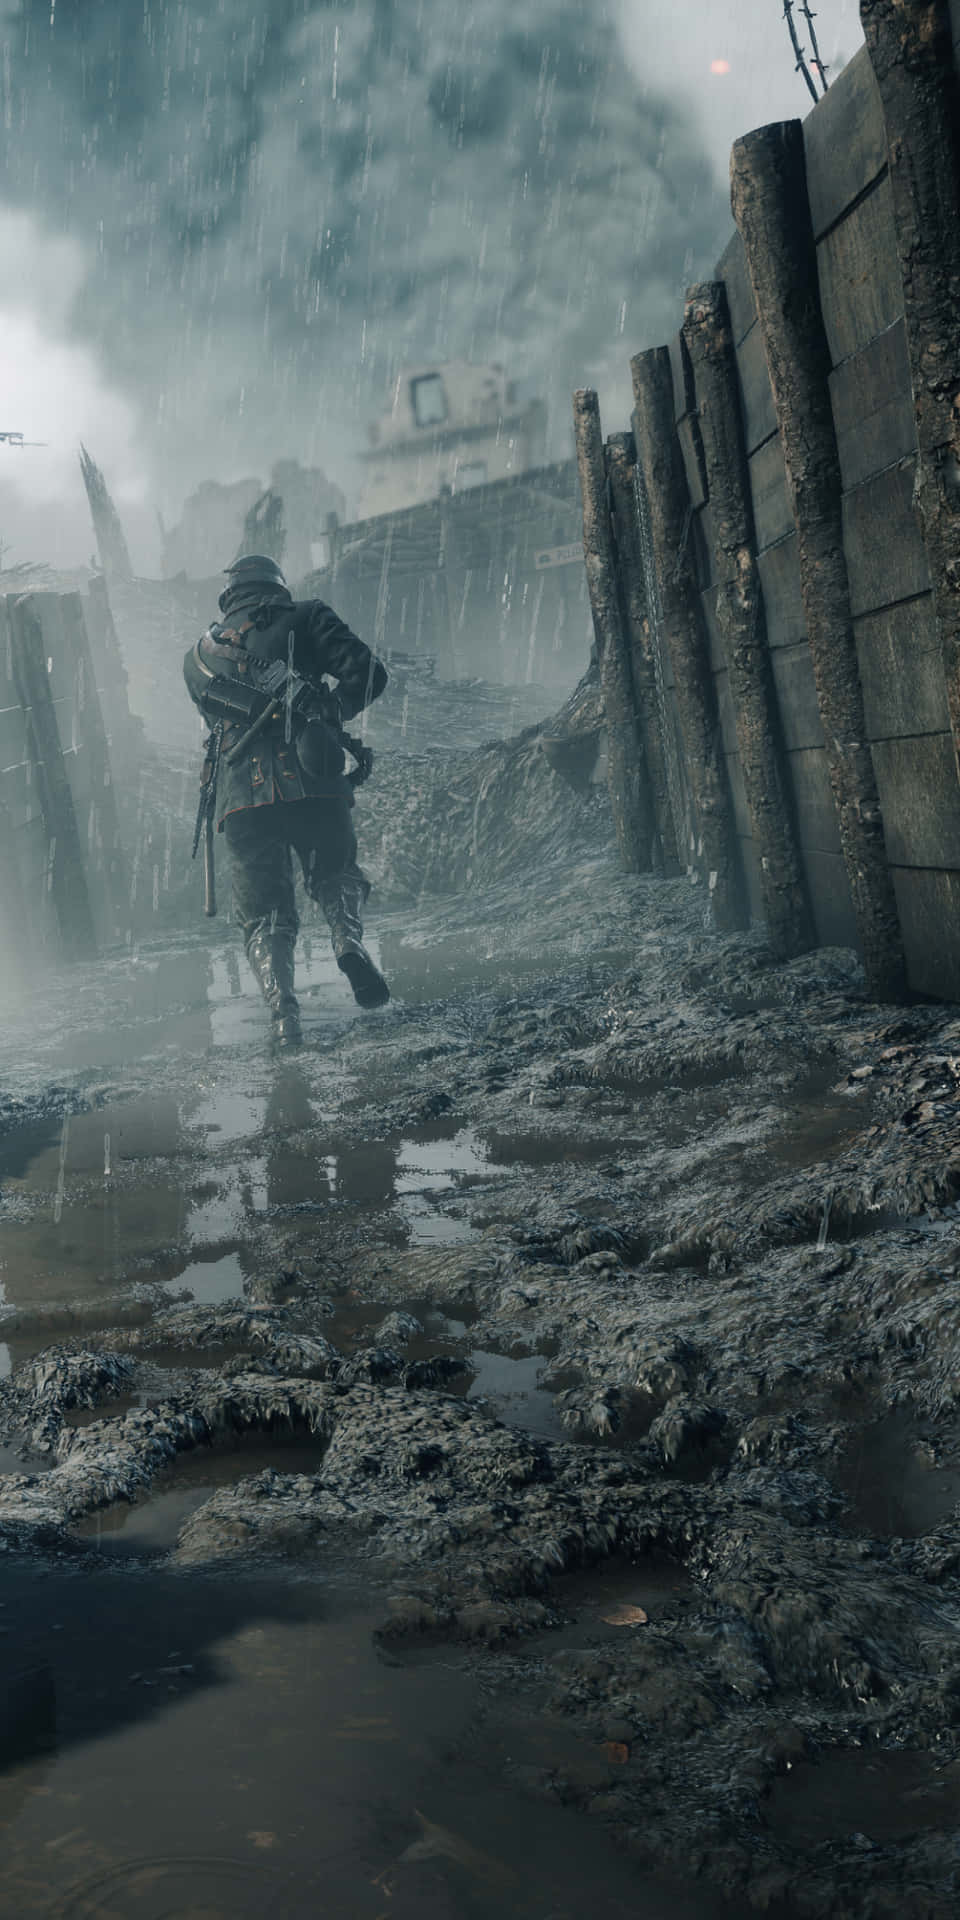 A Soldier Is Walking Through A Flooded Area